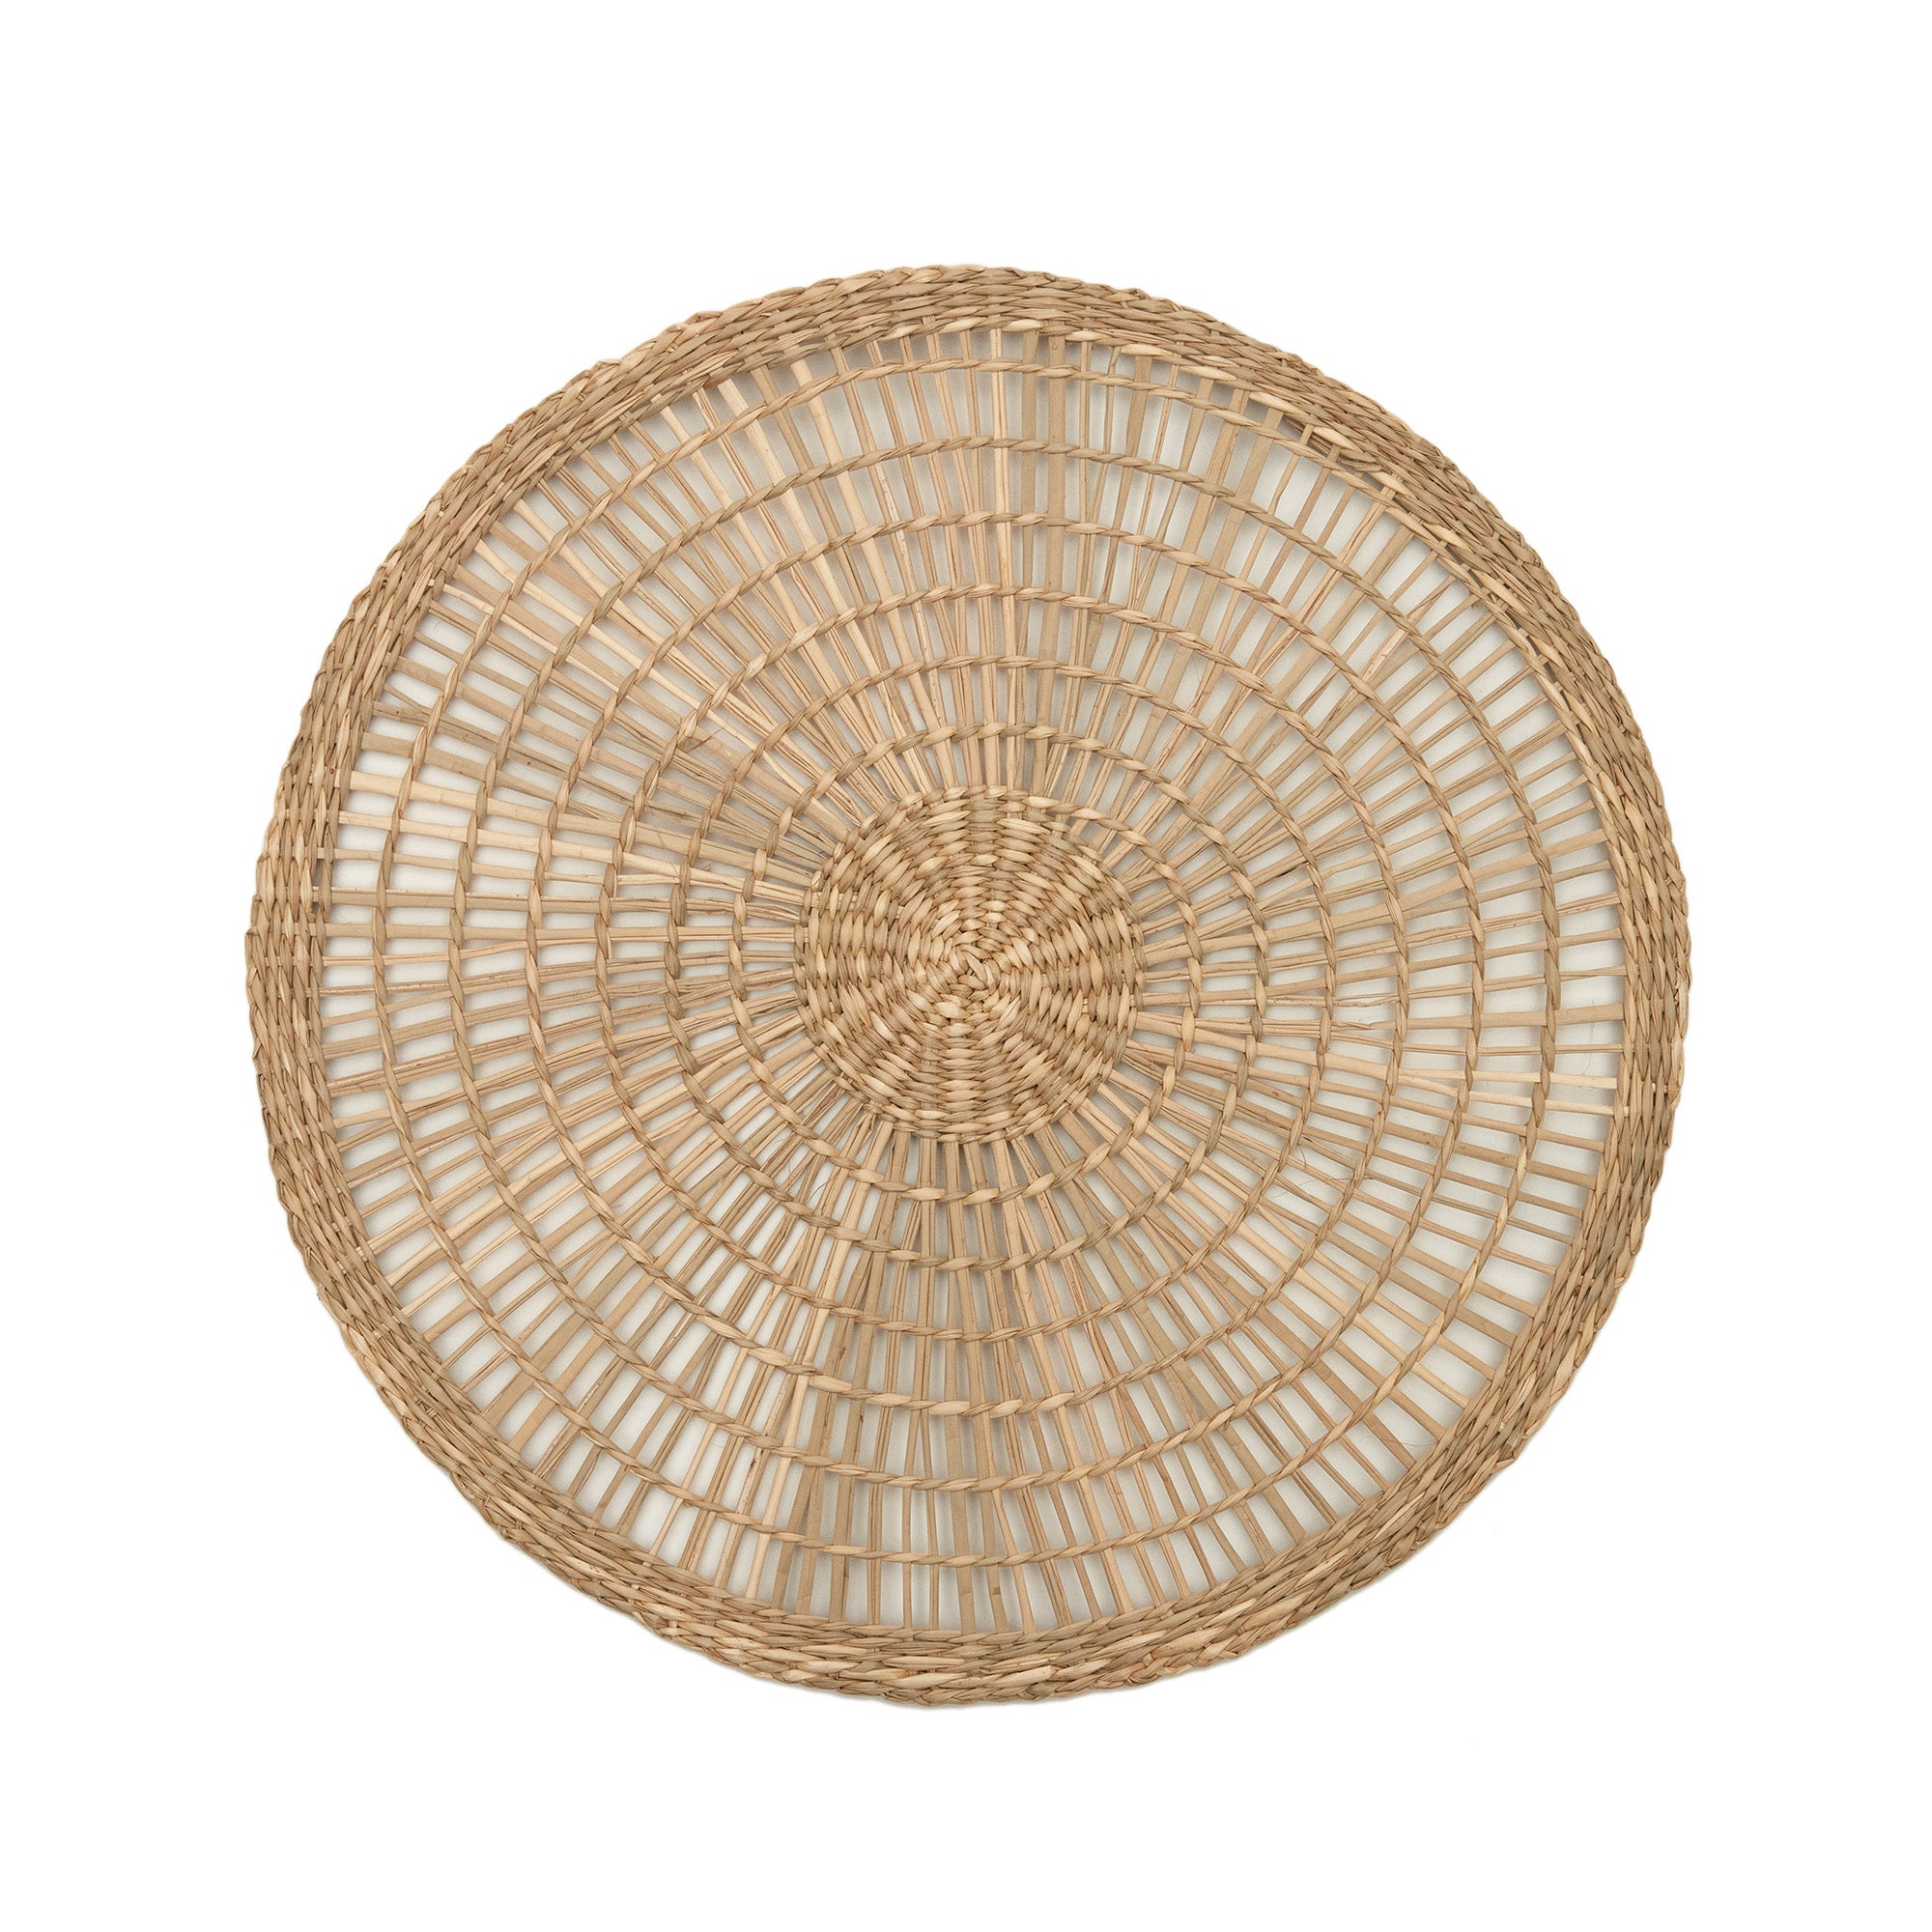 Palau set of 2 round placemats made of natural fibers in a natural finish, 38 x 38 cm